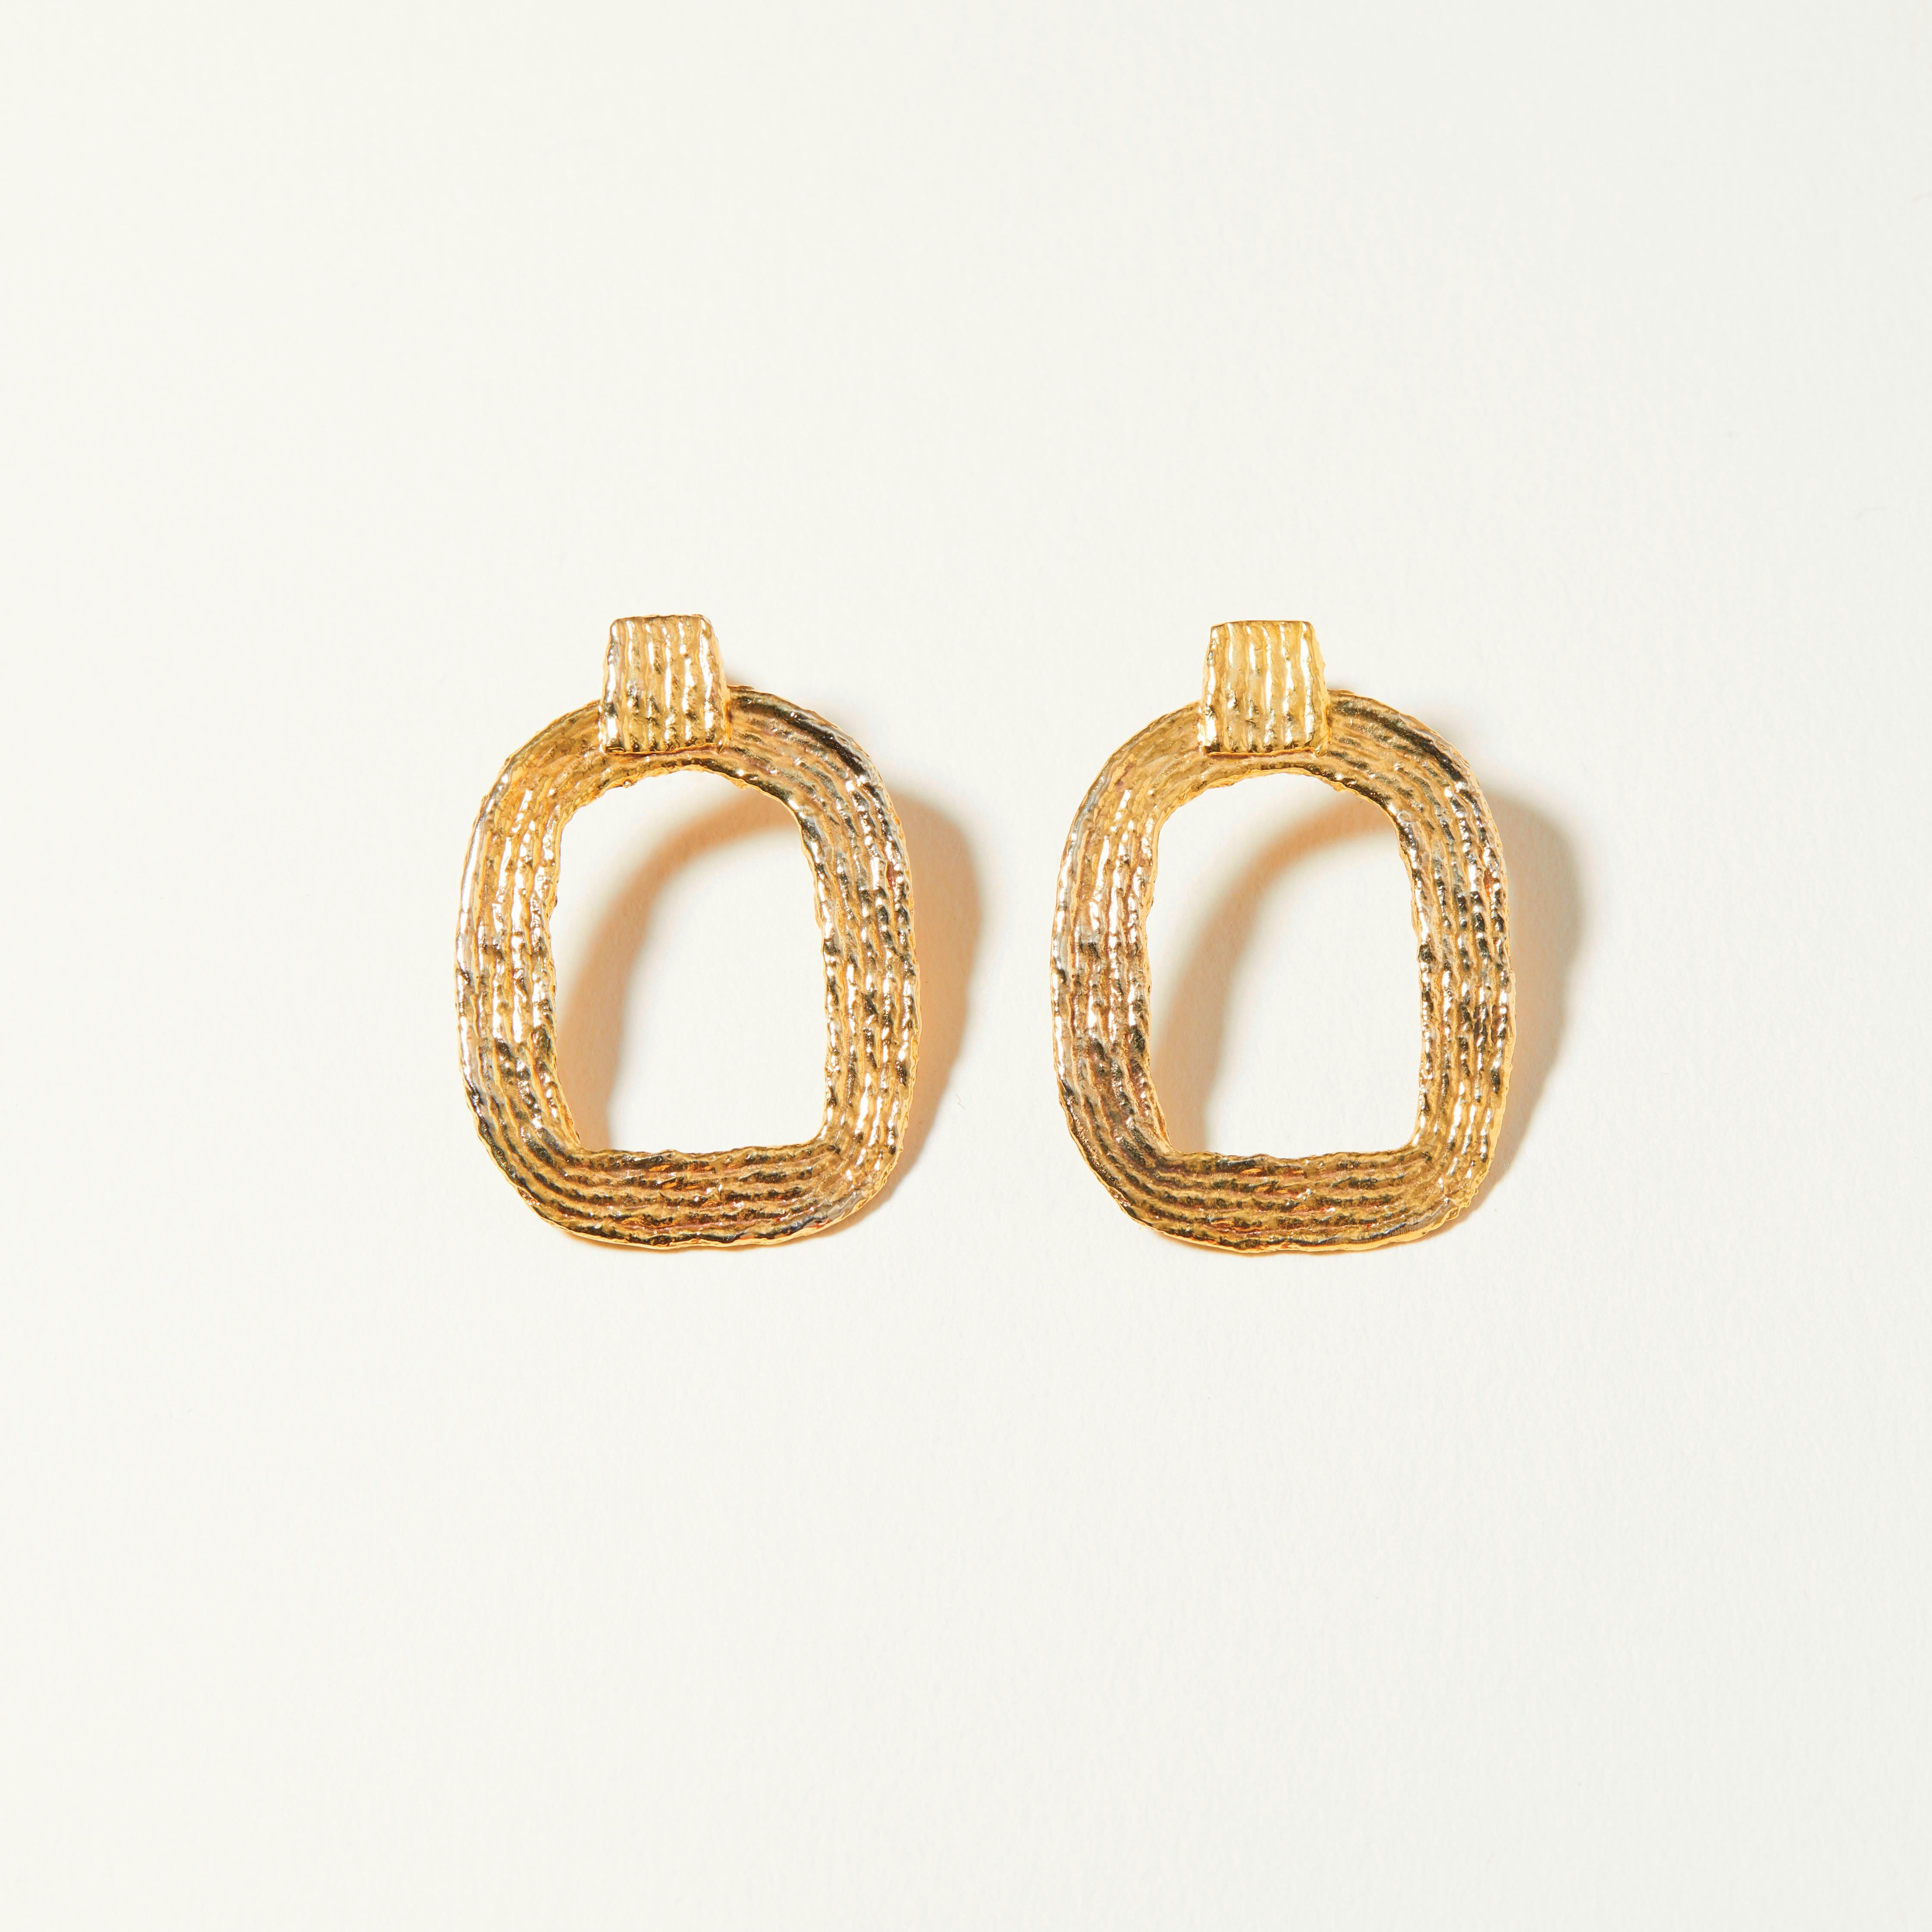 Inspired by artist Eva Hesse, the Eva Earrings are a pair of contemporary statement earrings made from 14K gold plated, reclaimed brass. These statement earrings consist of two, rounded rectangles cleverly balanced with a square detail, providing a